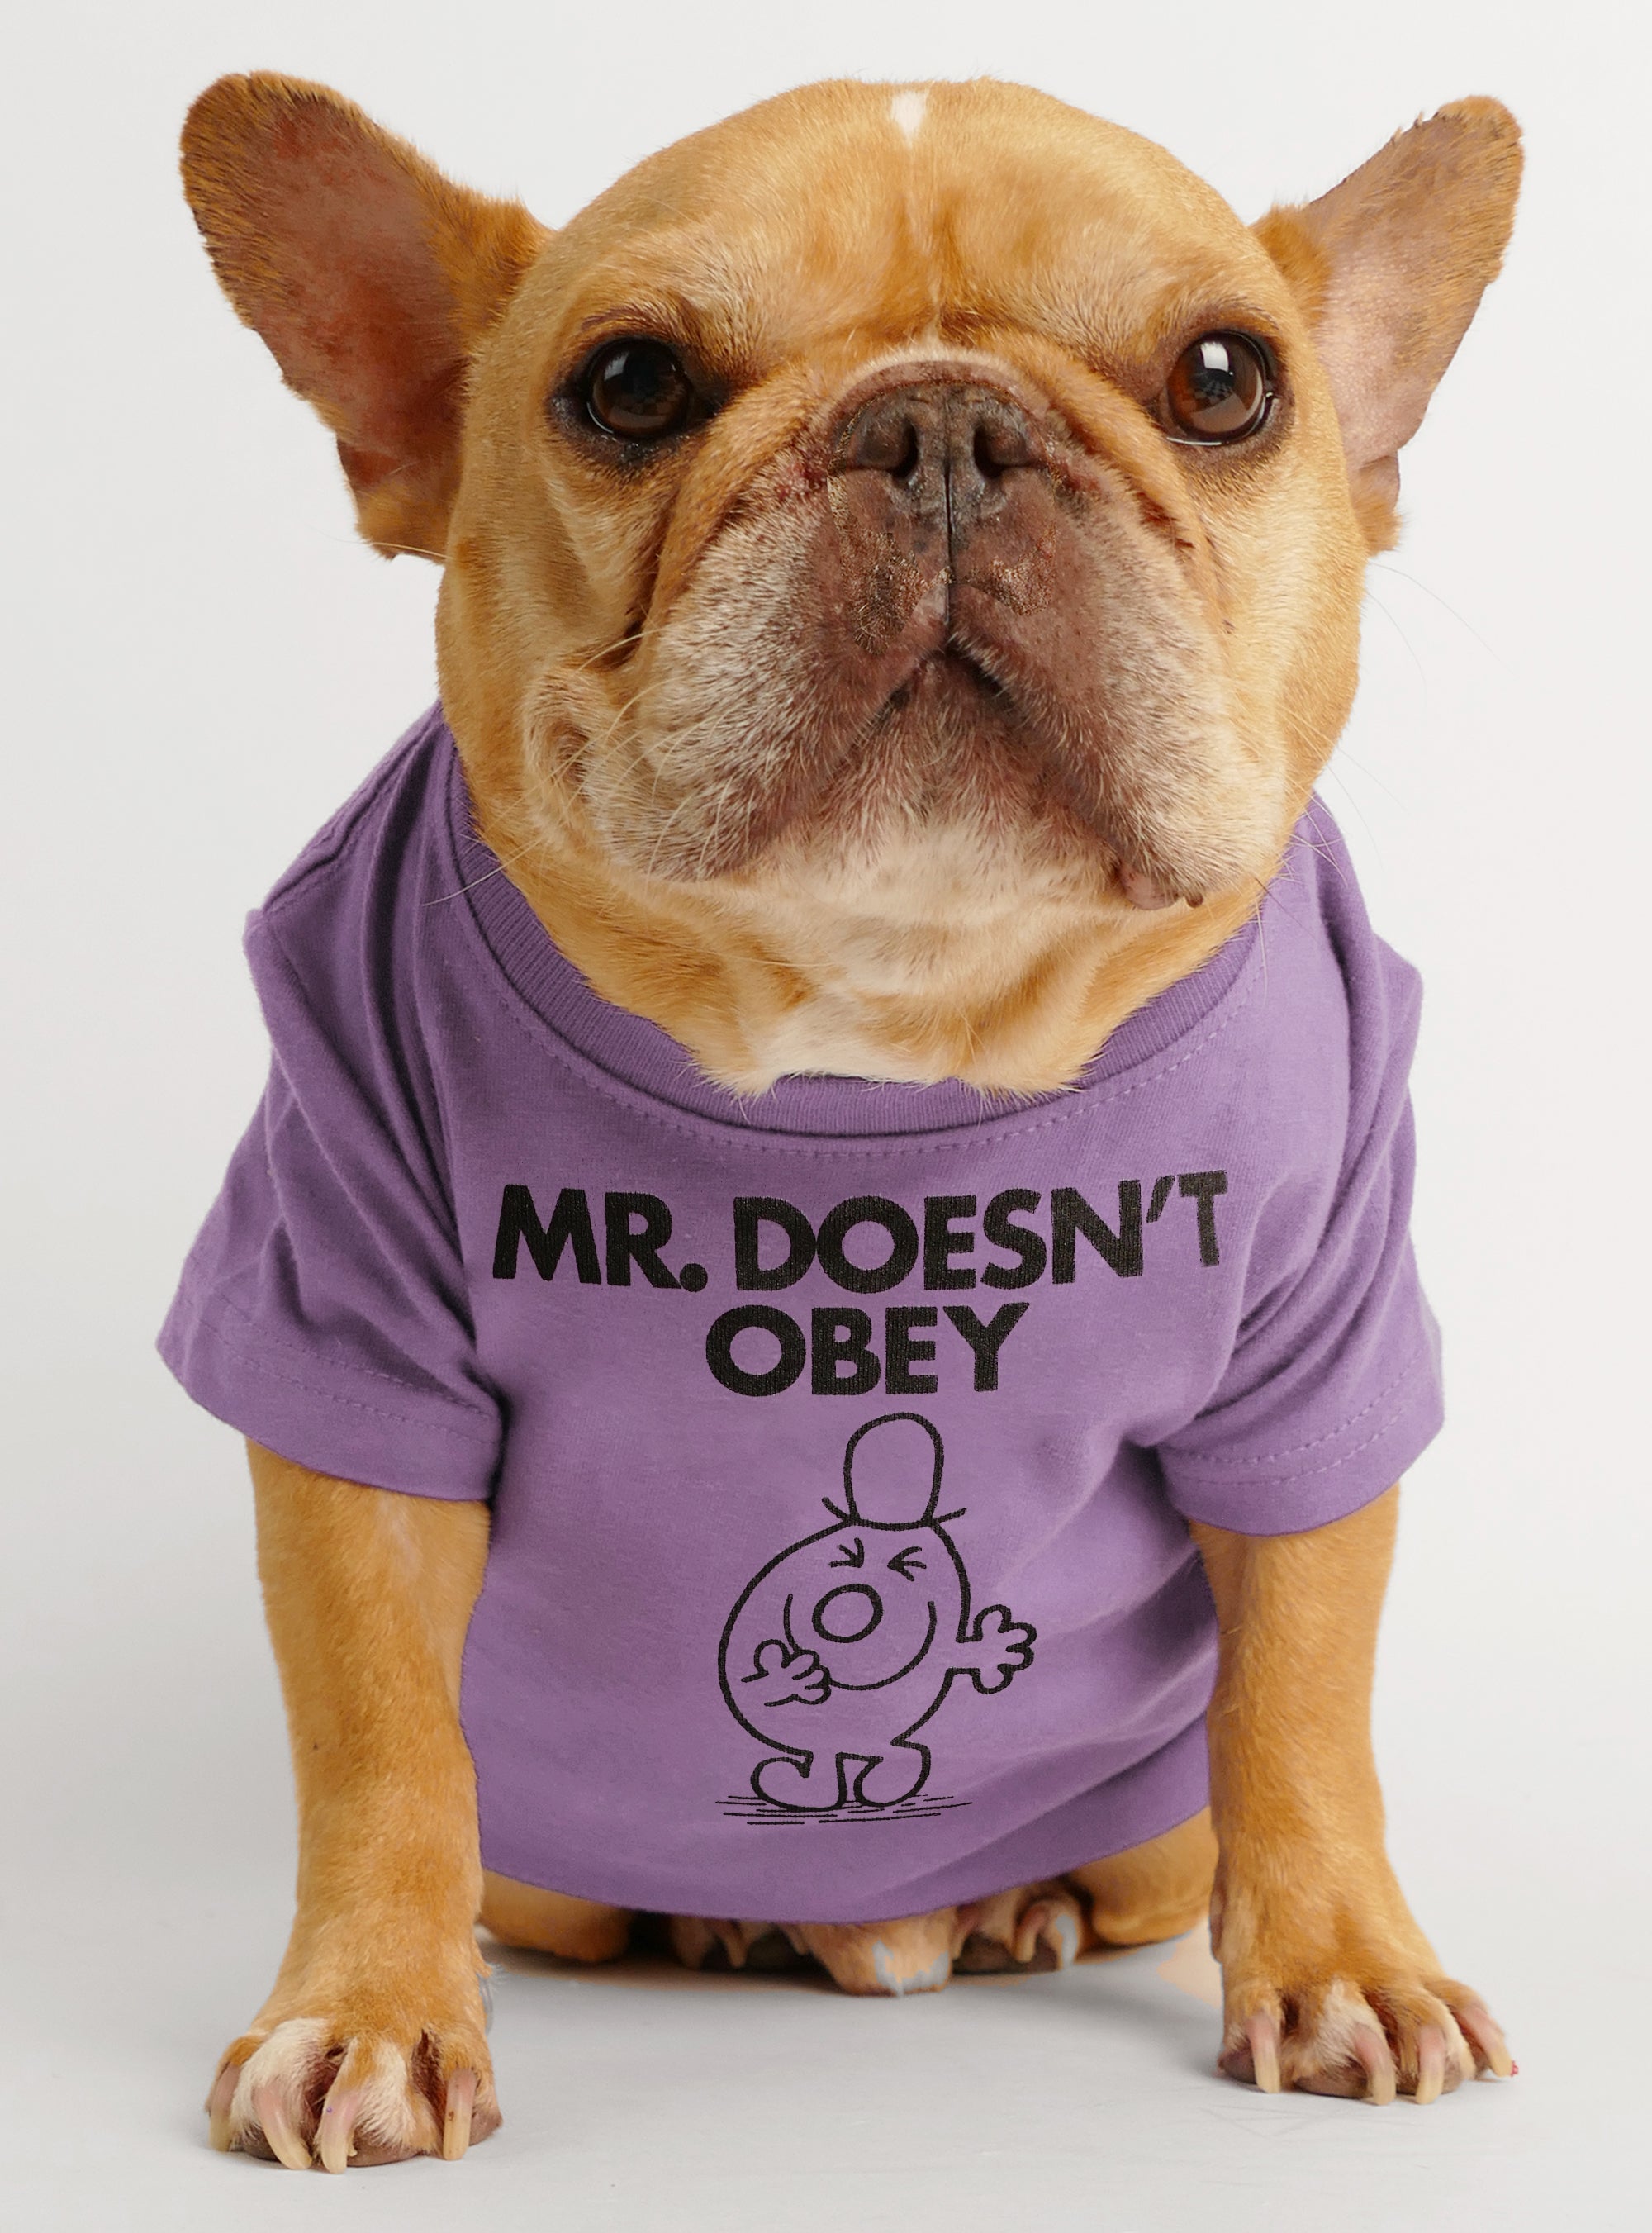 Little Miss Couldn't Care Less Dog Tee - Club Huey